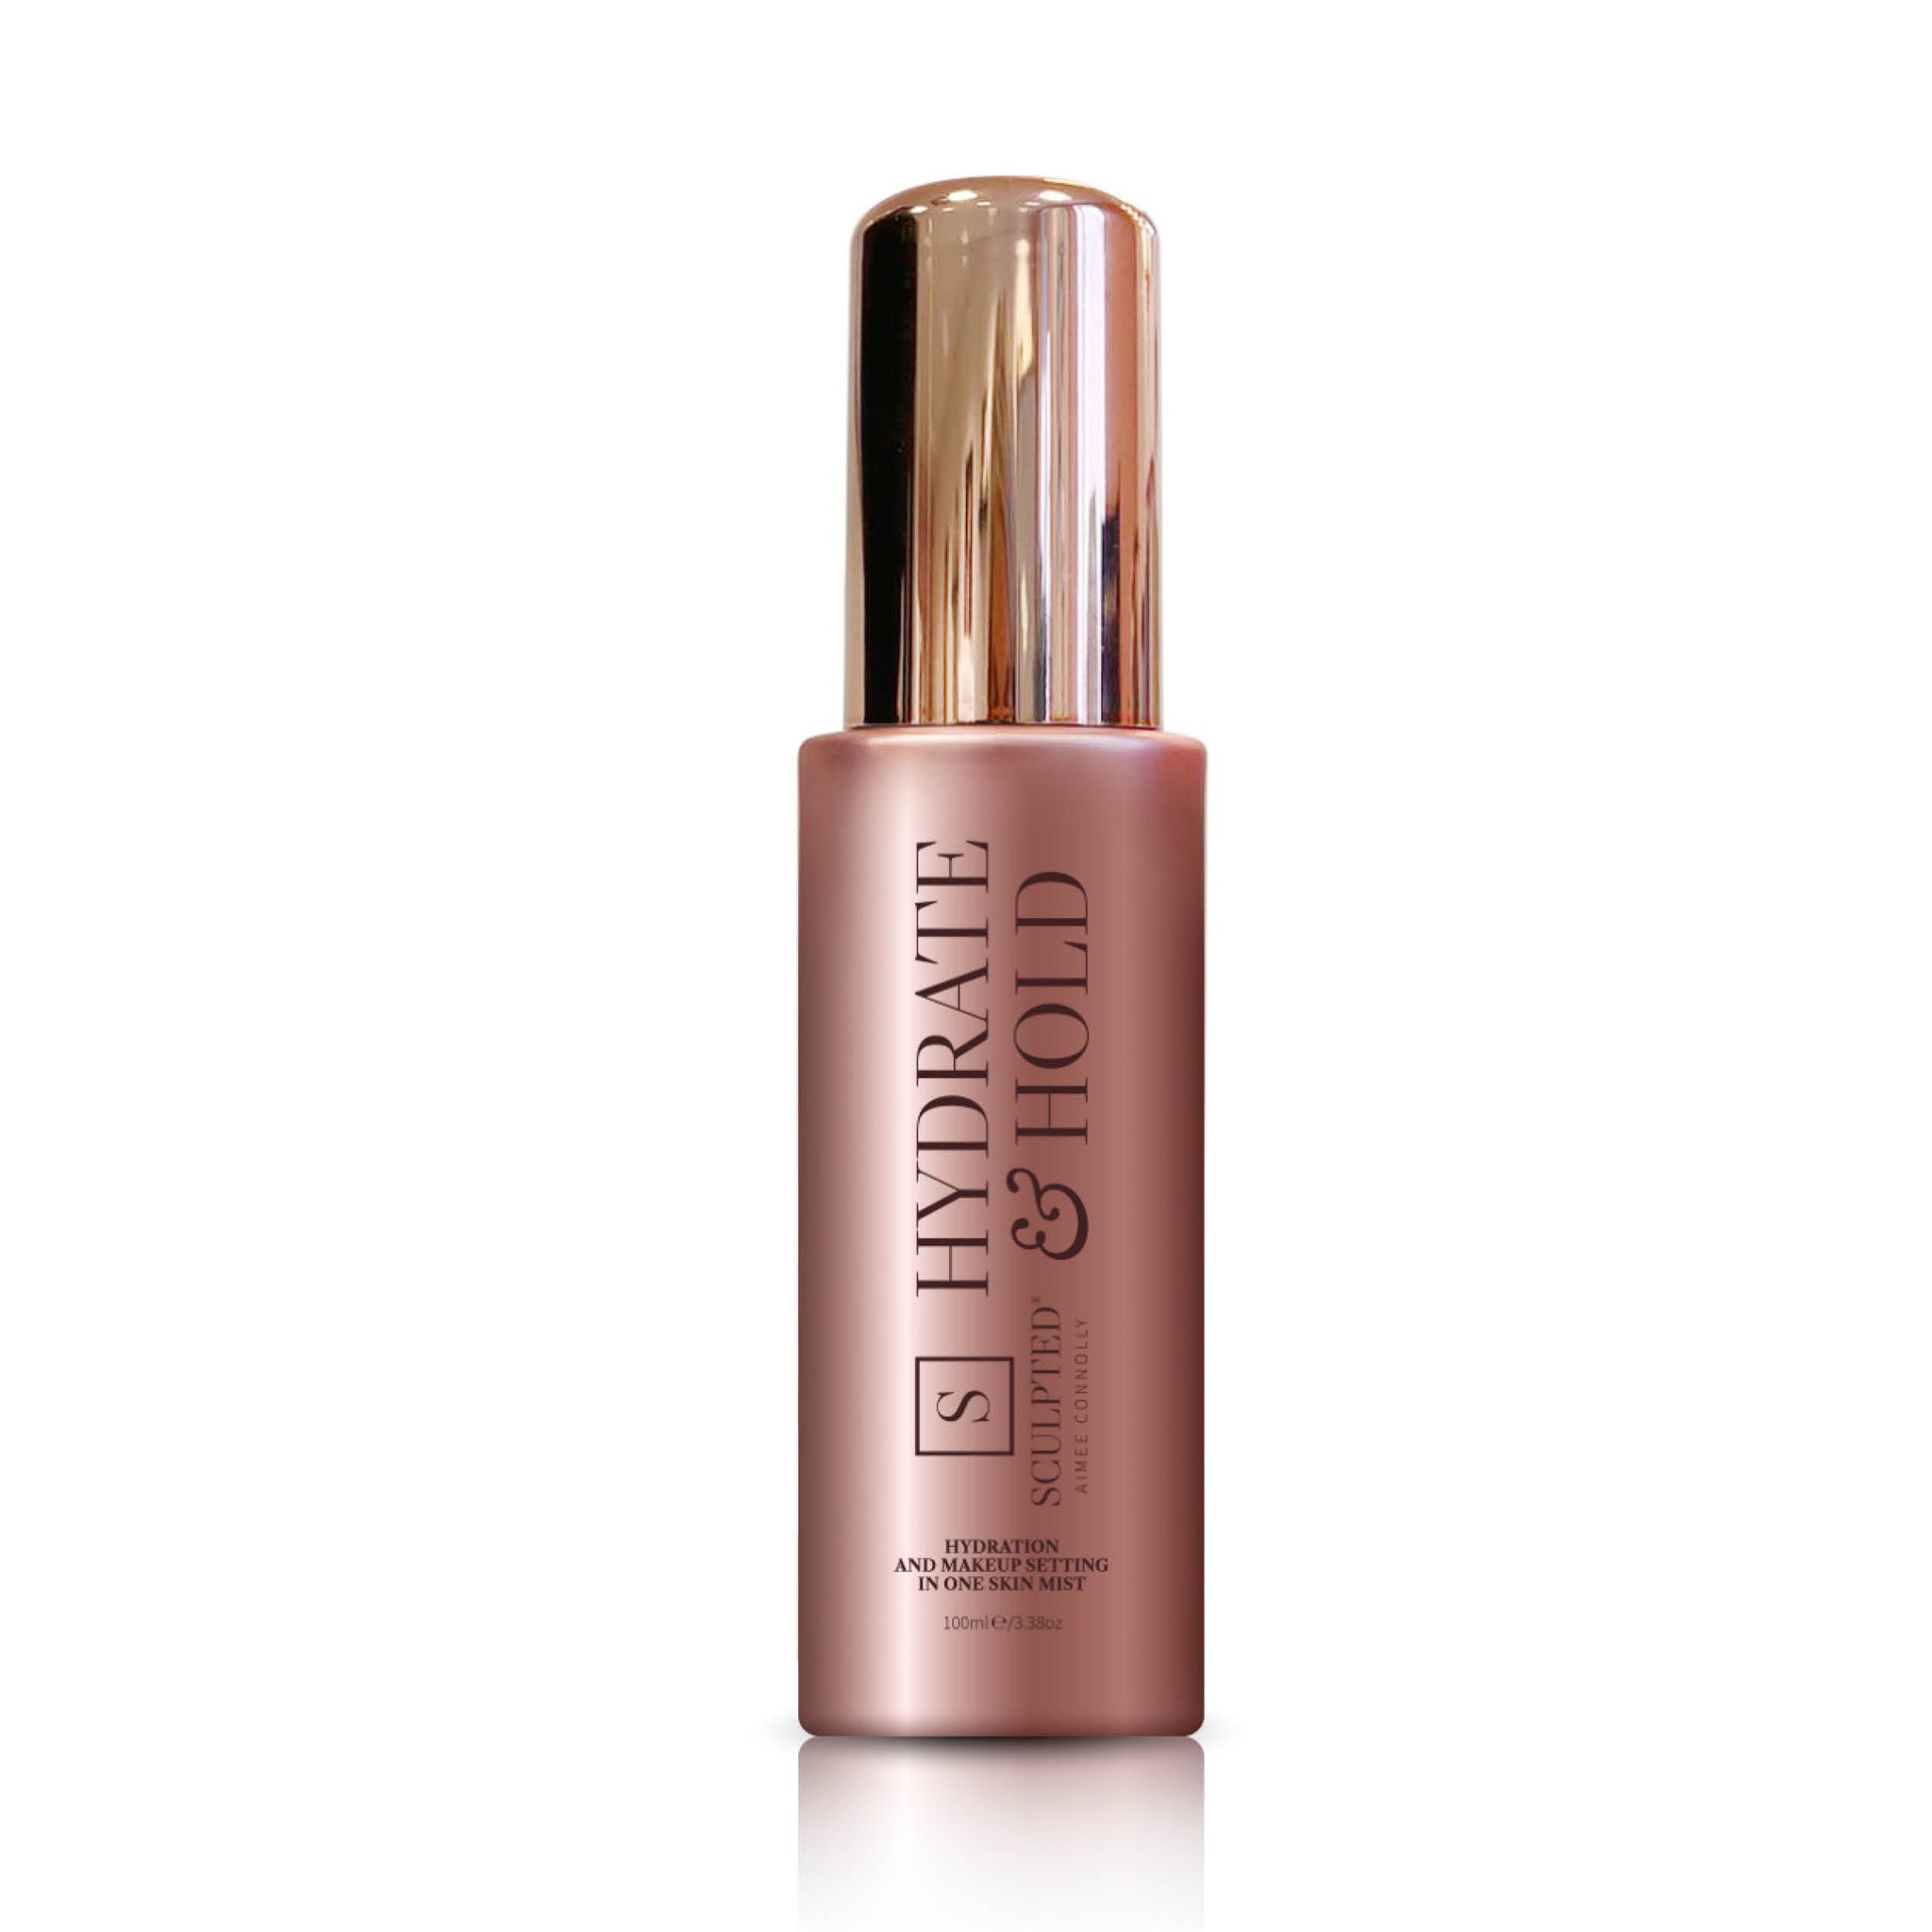 Sculpted By Aimee Connolly Hydrate & Hold Skin Mist